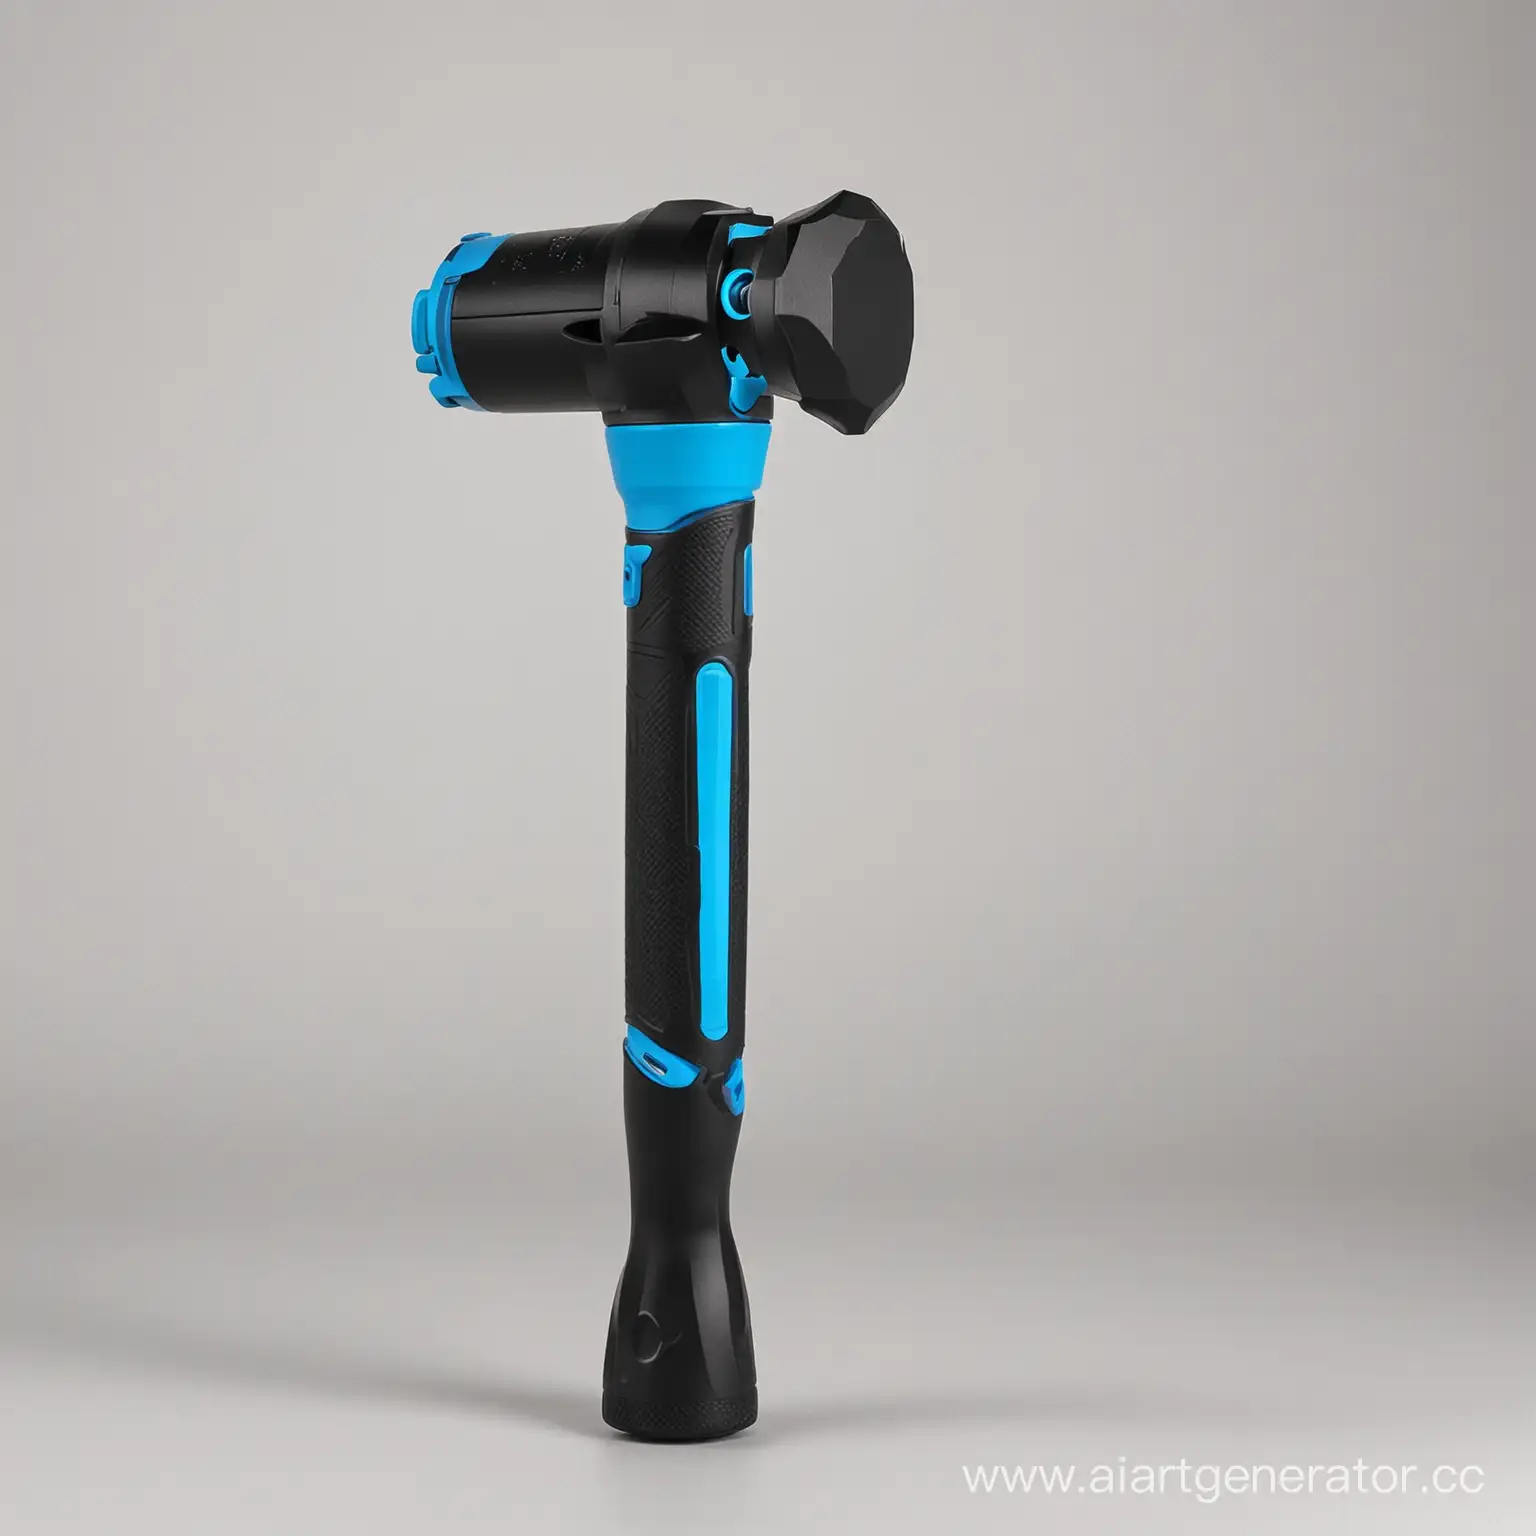 Ergonomic-Black-and-Blue-Hammer-with-Glowing-LampInspired-Design